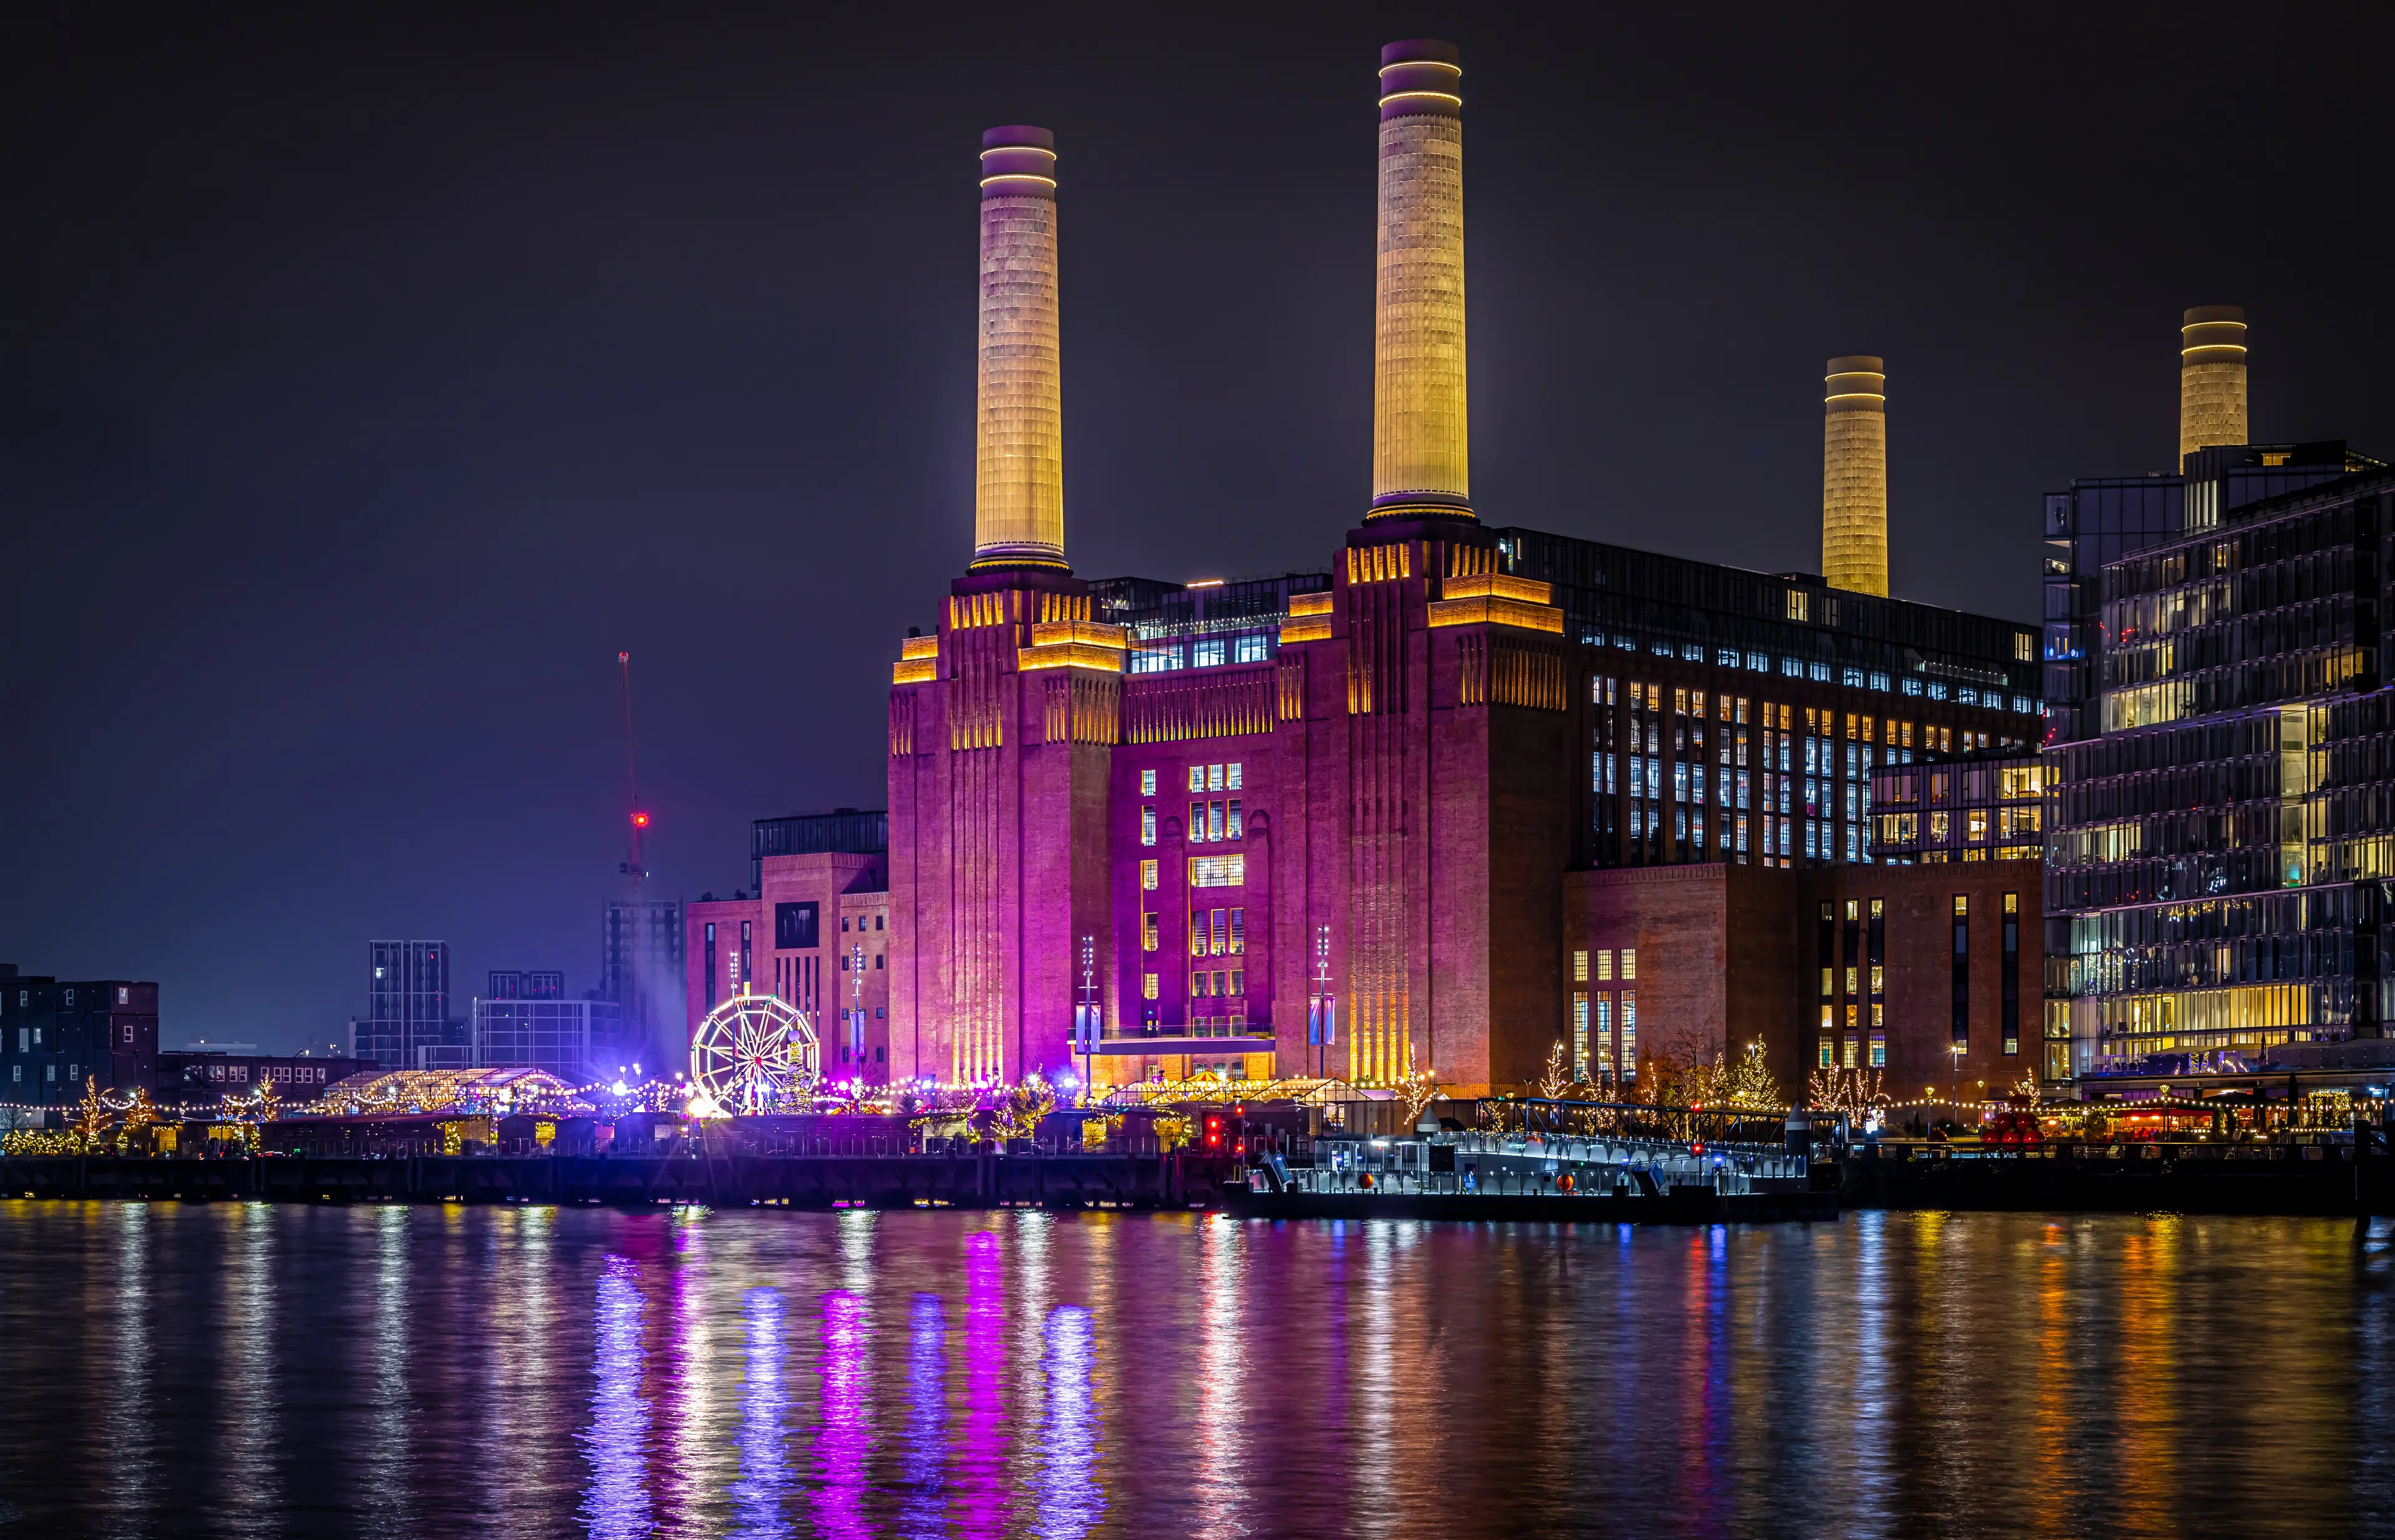 Battersea Power station during Christmas